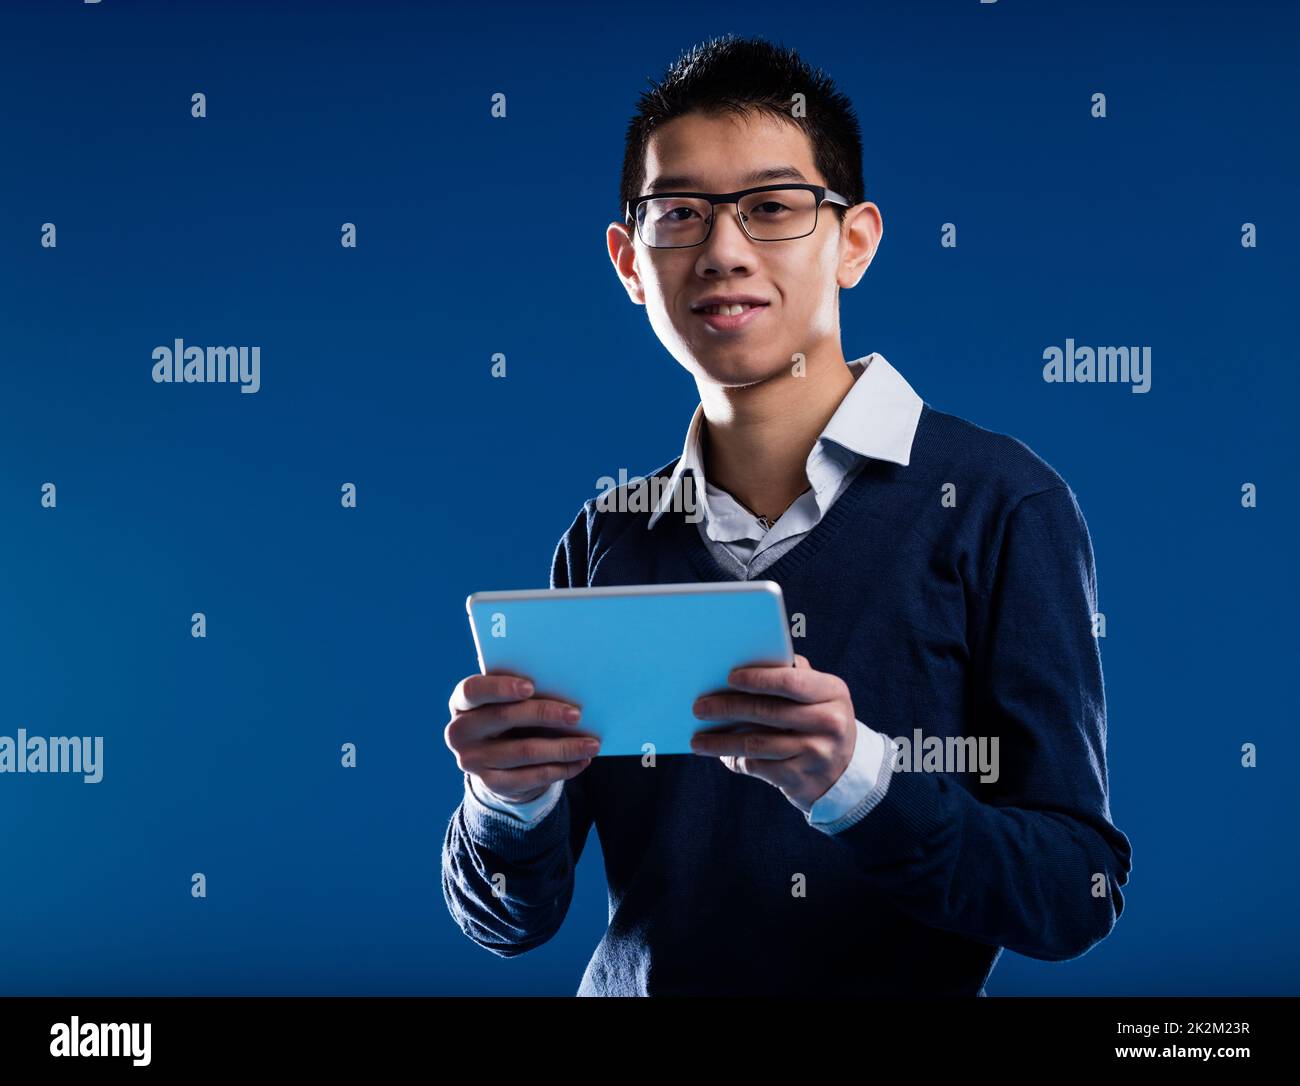 chinese guy smiling holding an ipad Stock Photo